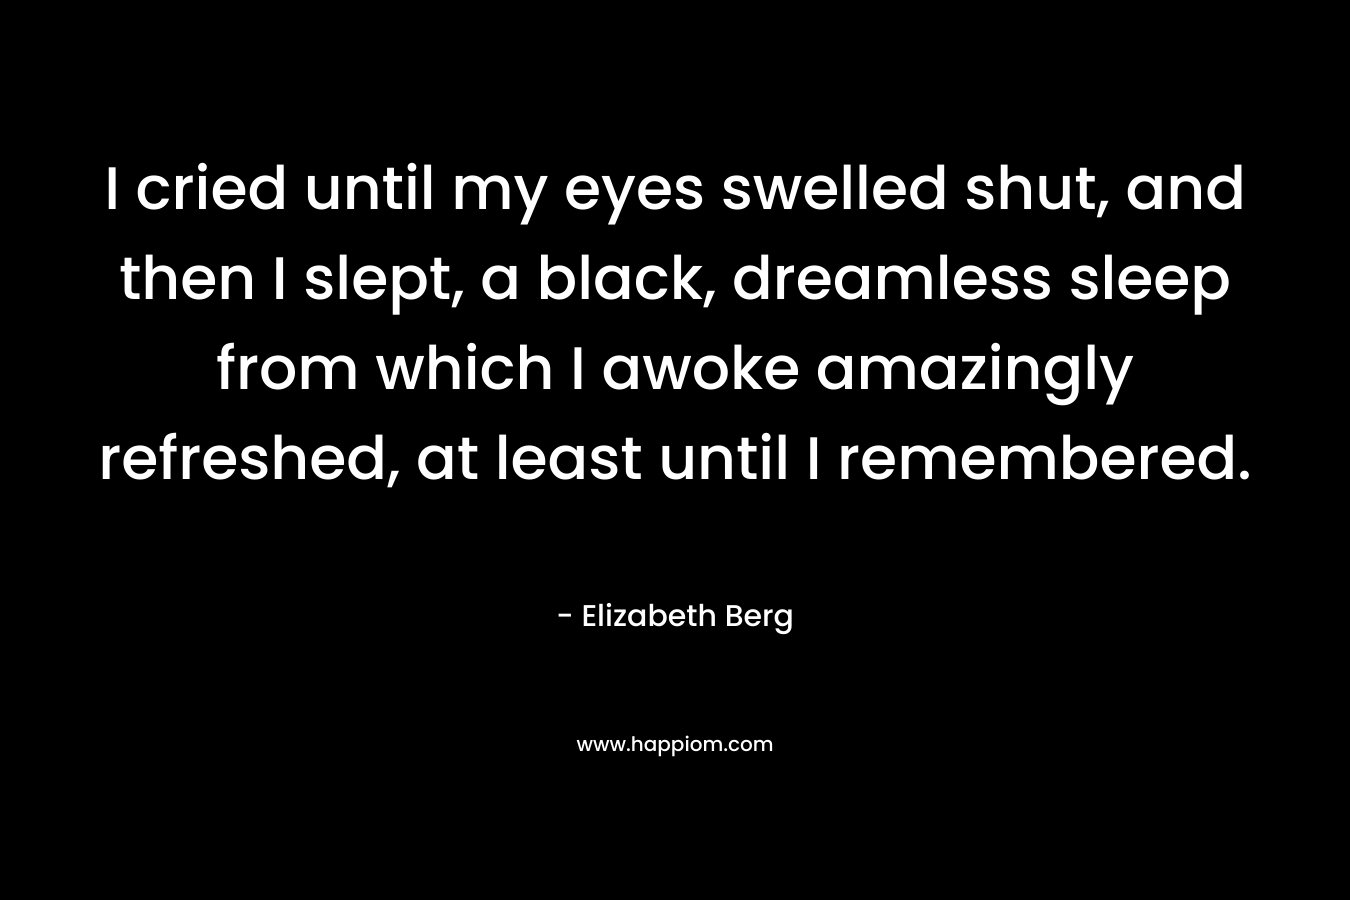 I cried until my eyes swelled shut, and then I slept, a black, dreamless sleep from which I awoke amazingly refreshed, at least until I remembered. – Elizabeth Berg